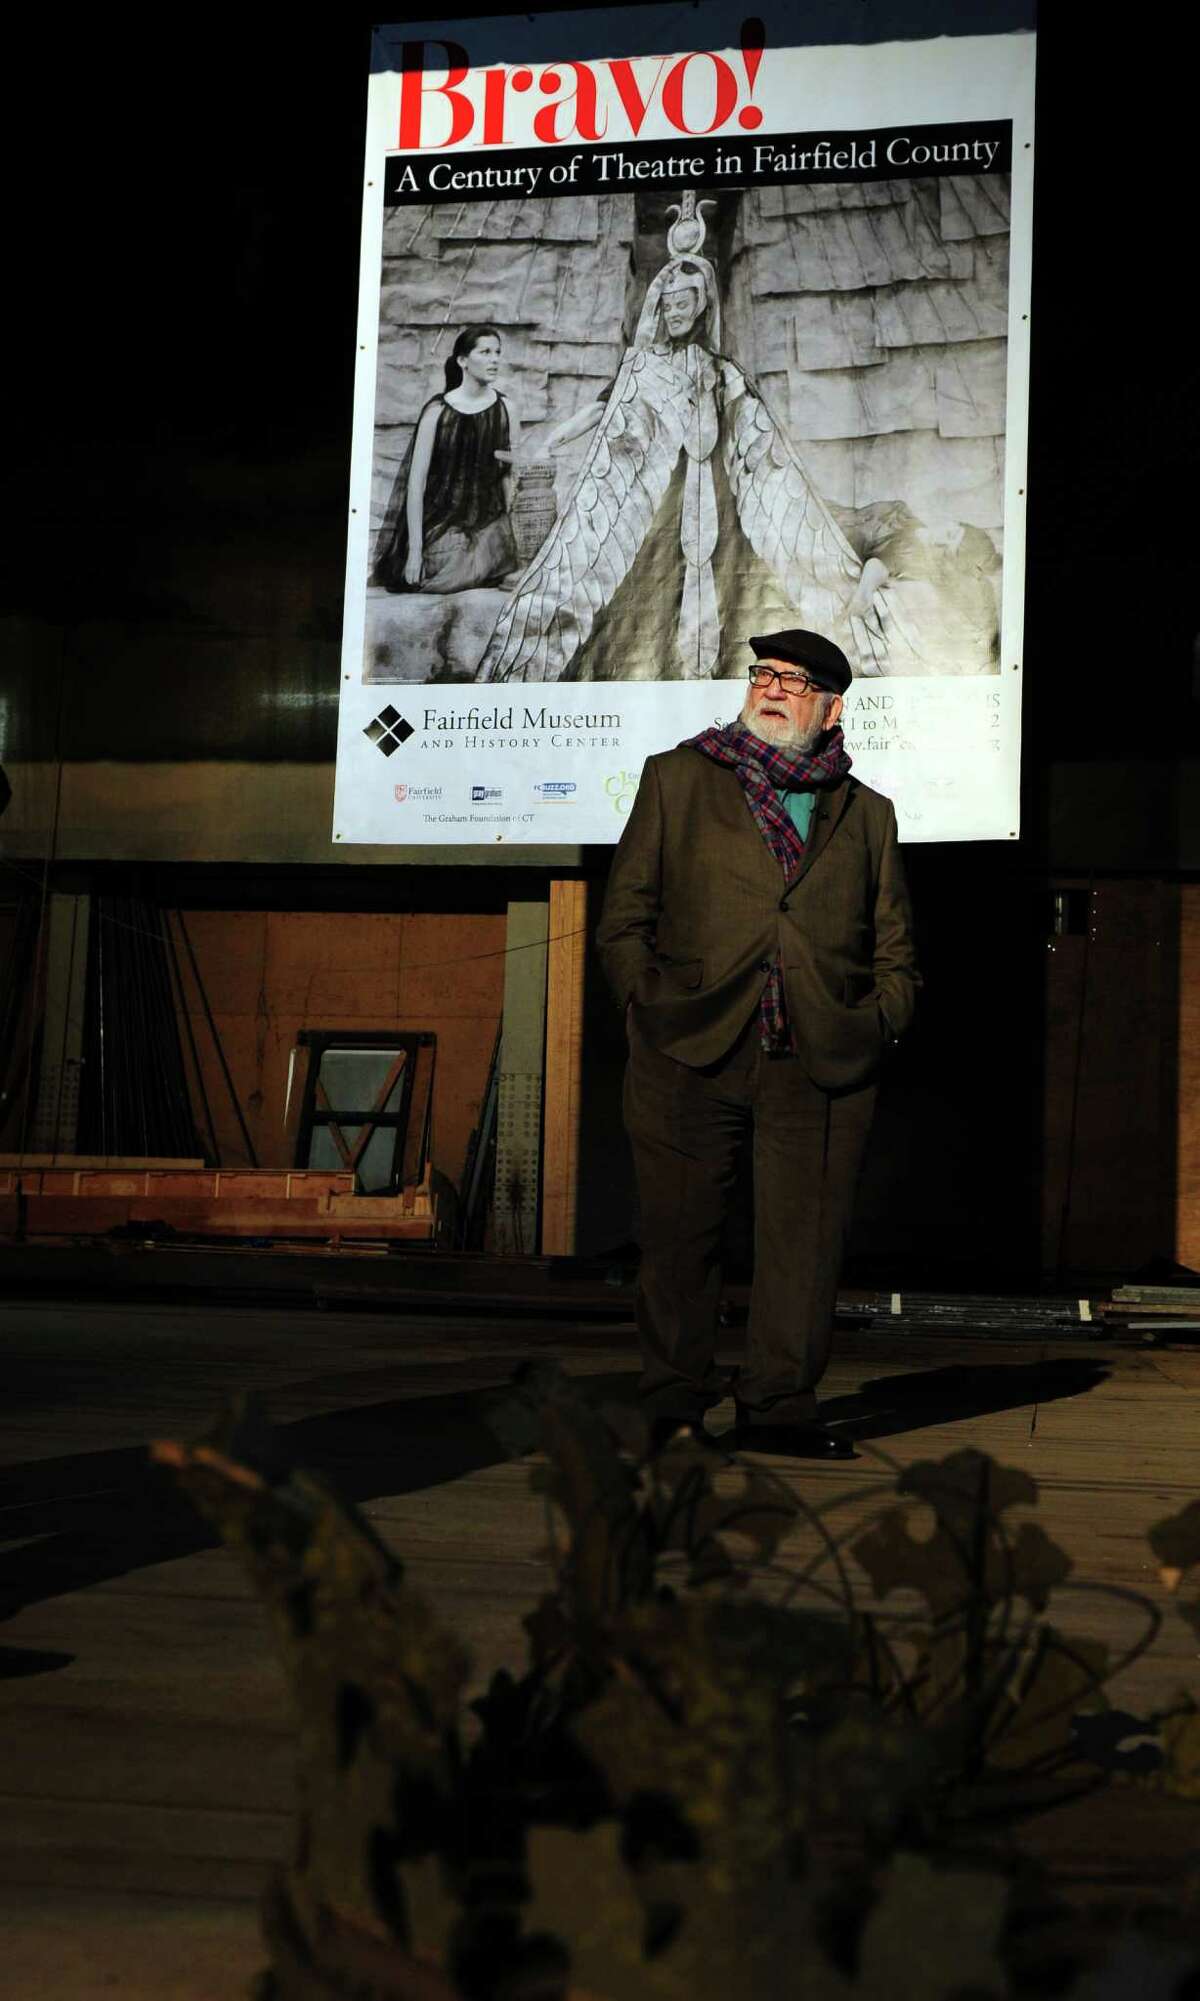 Actor Ed Asner tours The American Shakespeare Theatre in Stratford, Conn. Tuesday, Jan. 8, 2013. Asner spent the 1959 season at the American Shakespeare Festival Theatre.